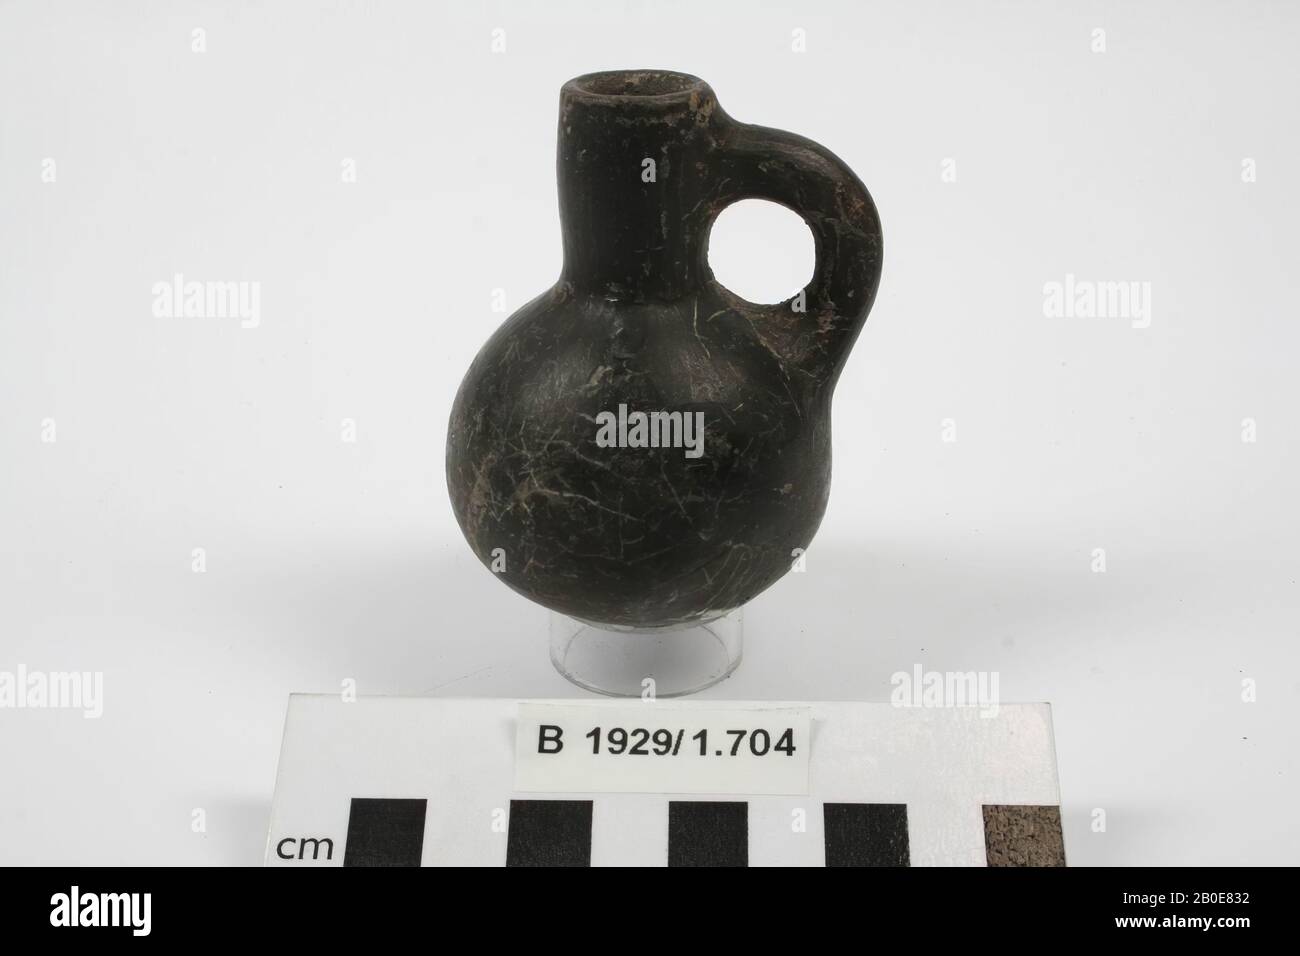 A small earthenware jug with a straight neck, one earpiece and a rounded body. The object is black slippled and polished., Crockery, pottery, H 8.2 cm, D belly 5.7 cm, Iron Age II 925-539 BC, Palestine Stock Photo